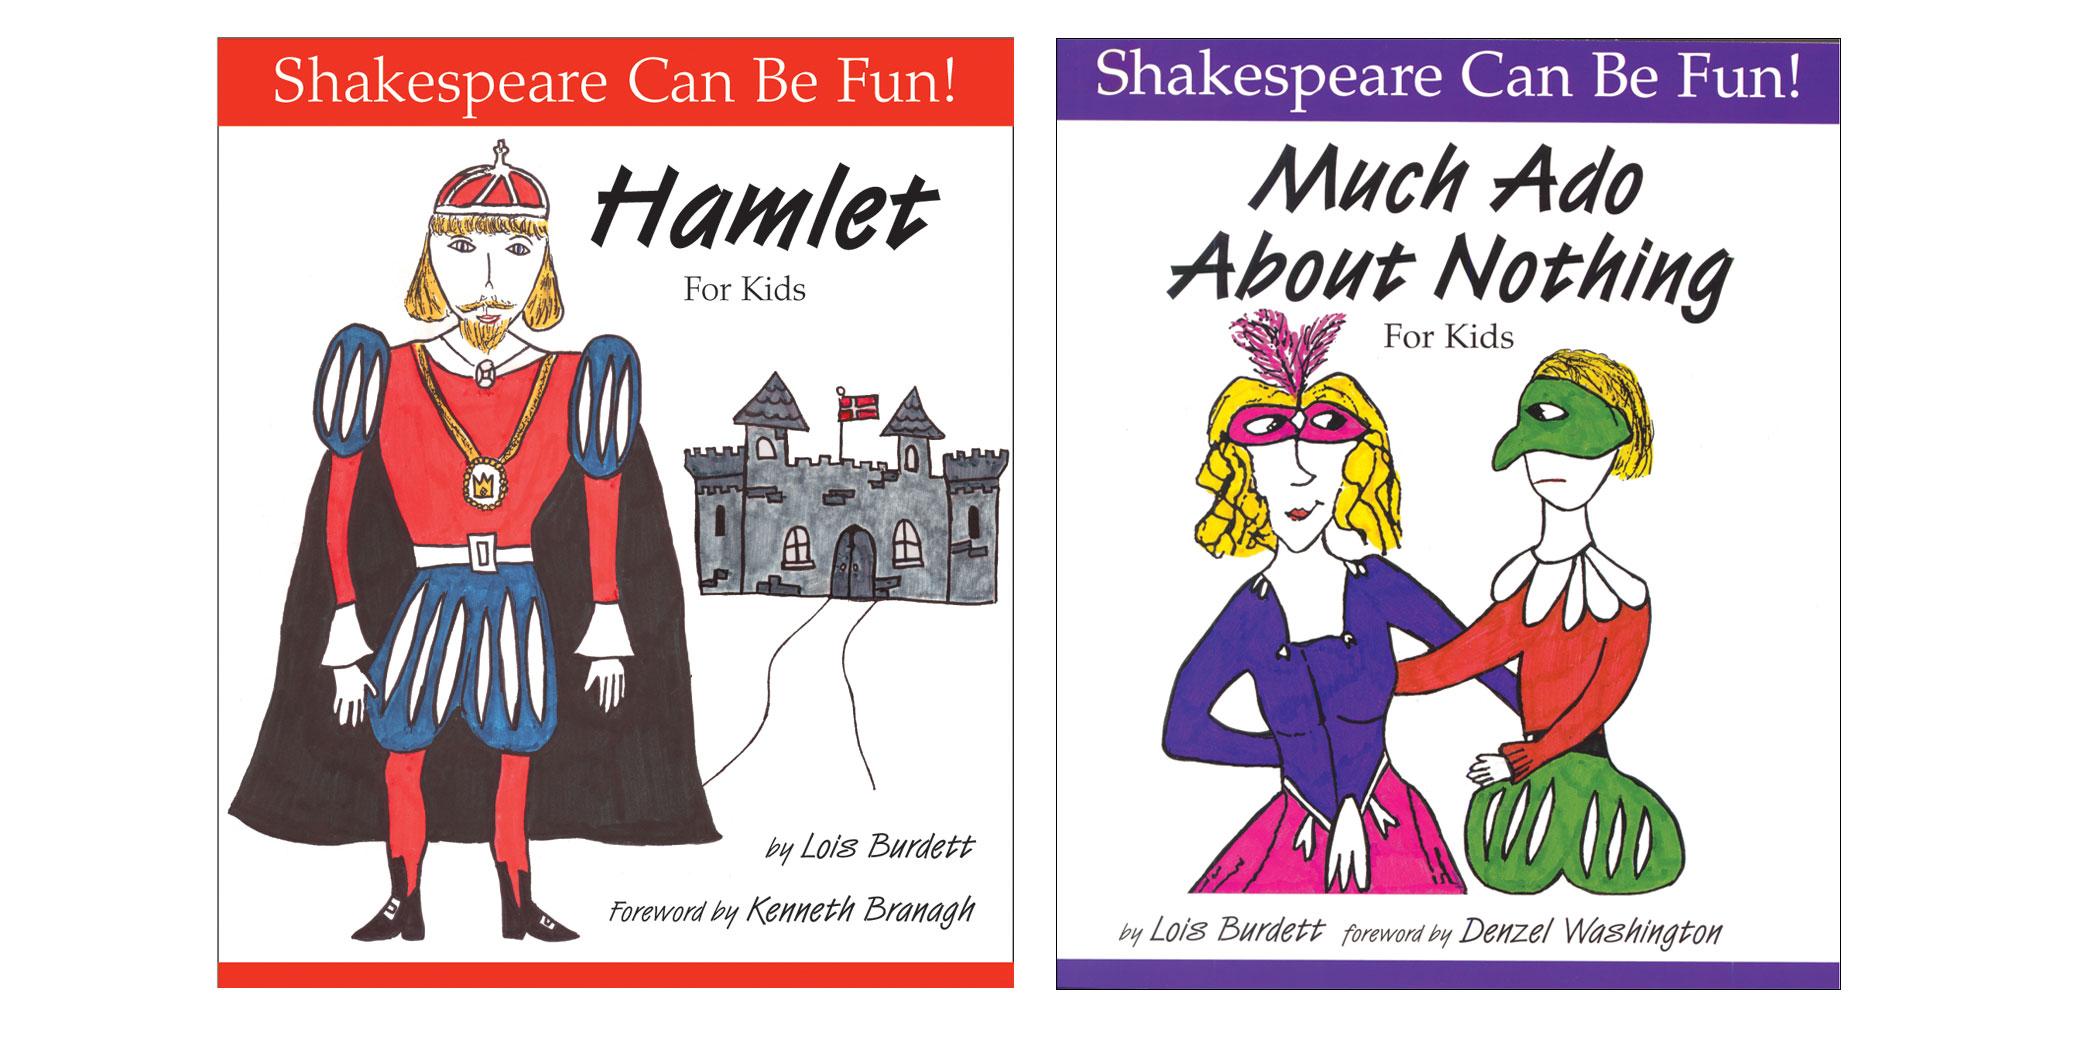 The Shakespeare Can Be Fun! series